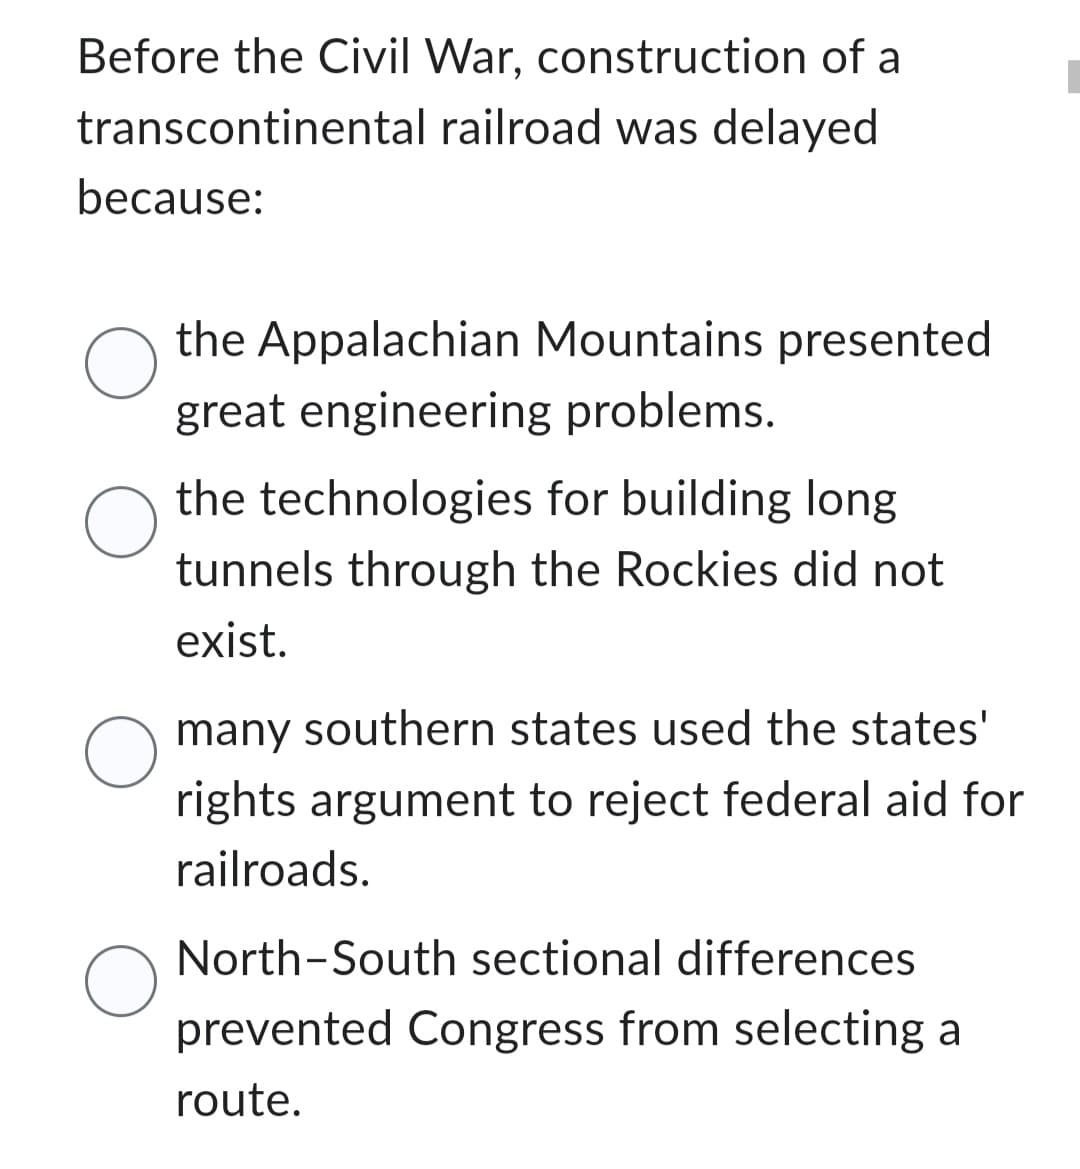 Before the Civil War, construction of a
transcontinental
railroad was delayed
because:
O
O
O
O
the Appalachian Mountains presented
great engineering problems.
the technologies for building long
tunnels through the Rockies did not
exist.
many southern states used the states'
rights argument to reject federal aid for
railroads.
North-South sectional differences
prevented Congress from selecting a
route.